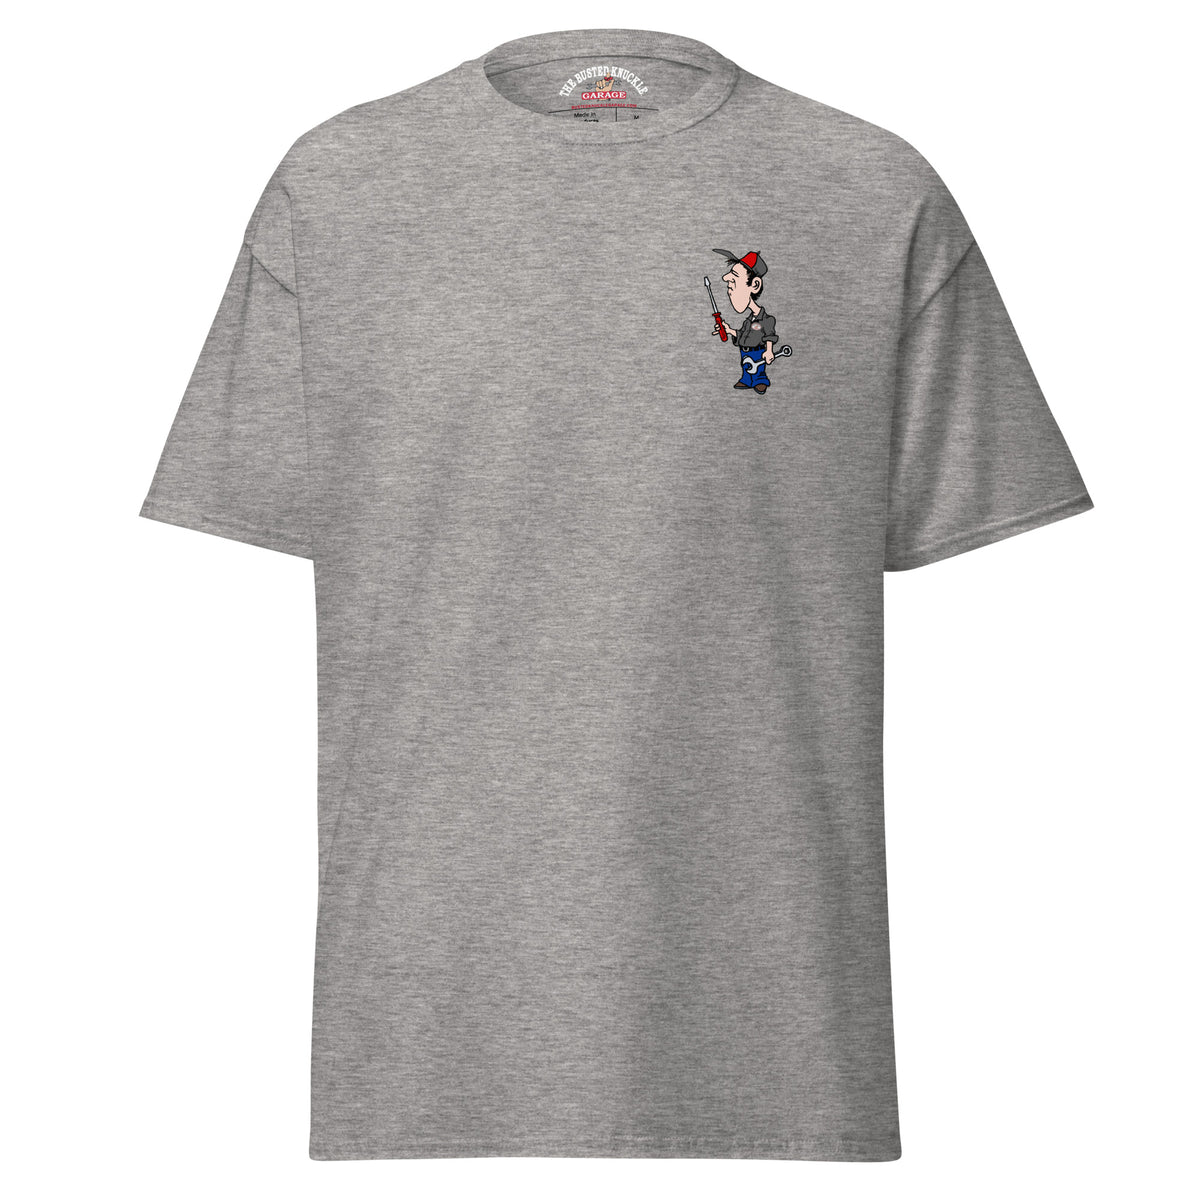 Busted Knuckle Garage Screw Up Mechanic Two-Sided T-Shirt